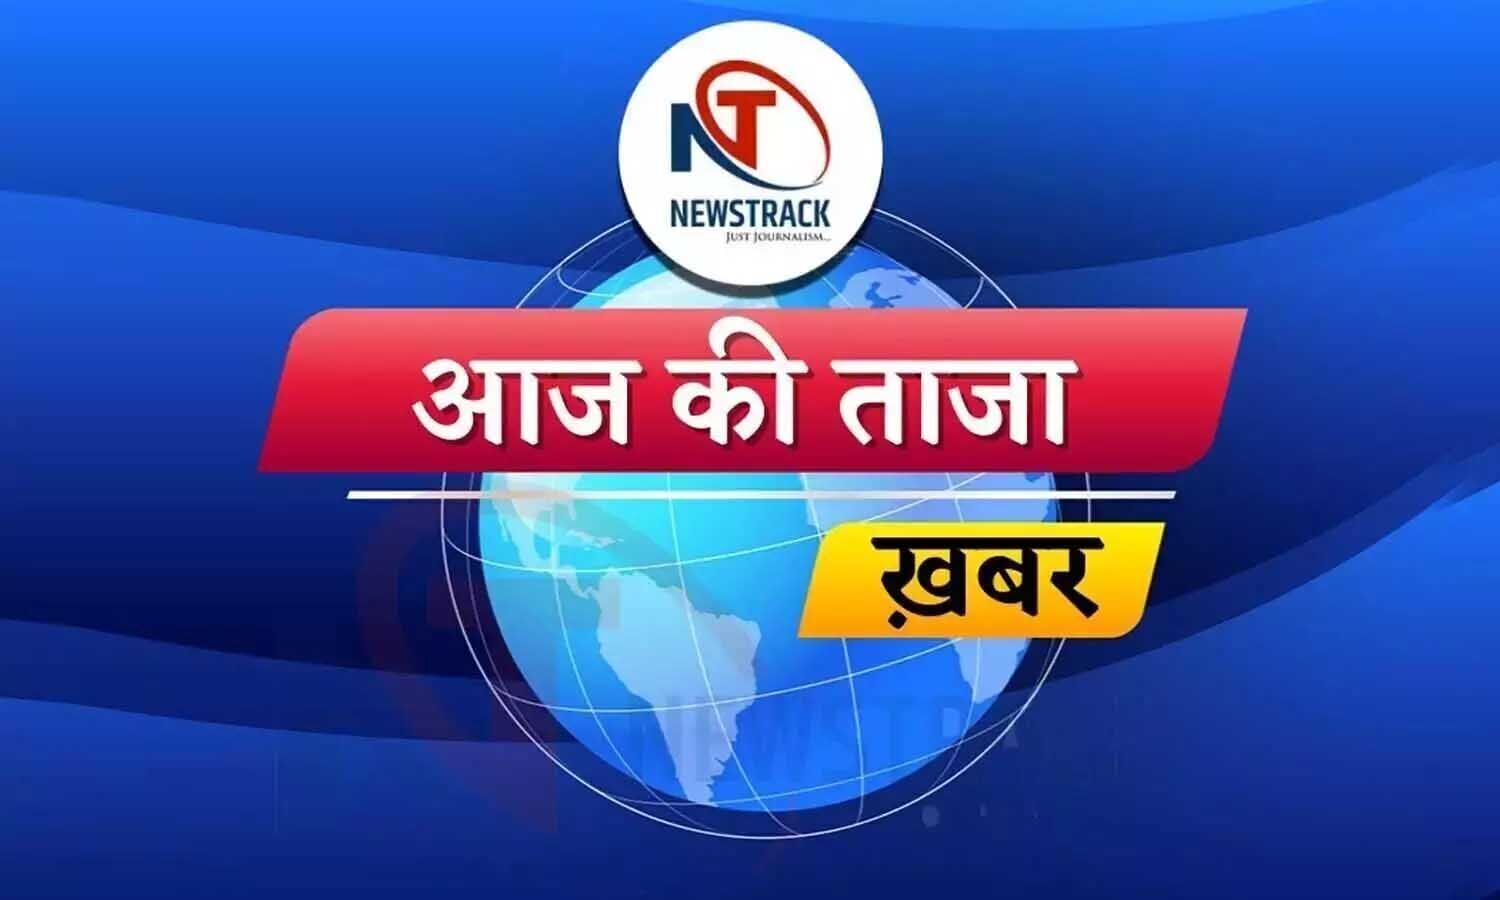 Aaj Ki Taza Khabar: Know all the big news of the country and the world in just one click